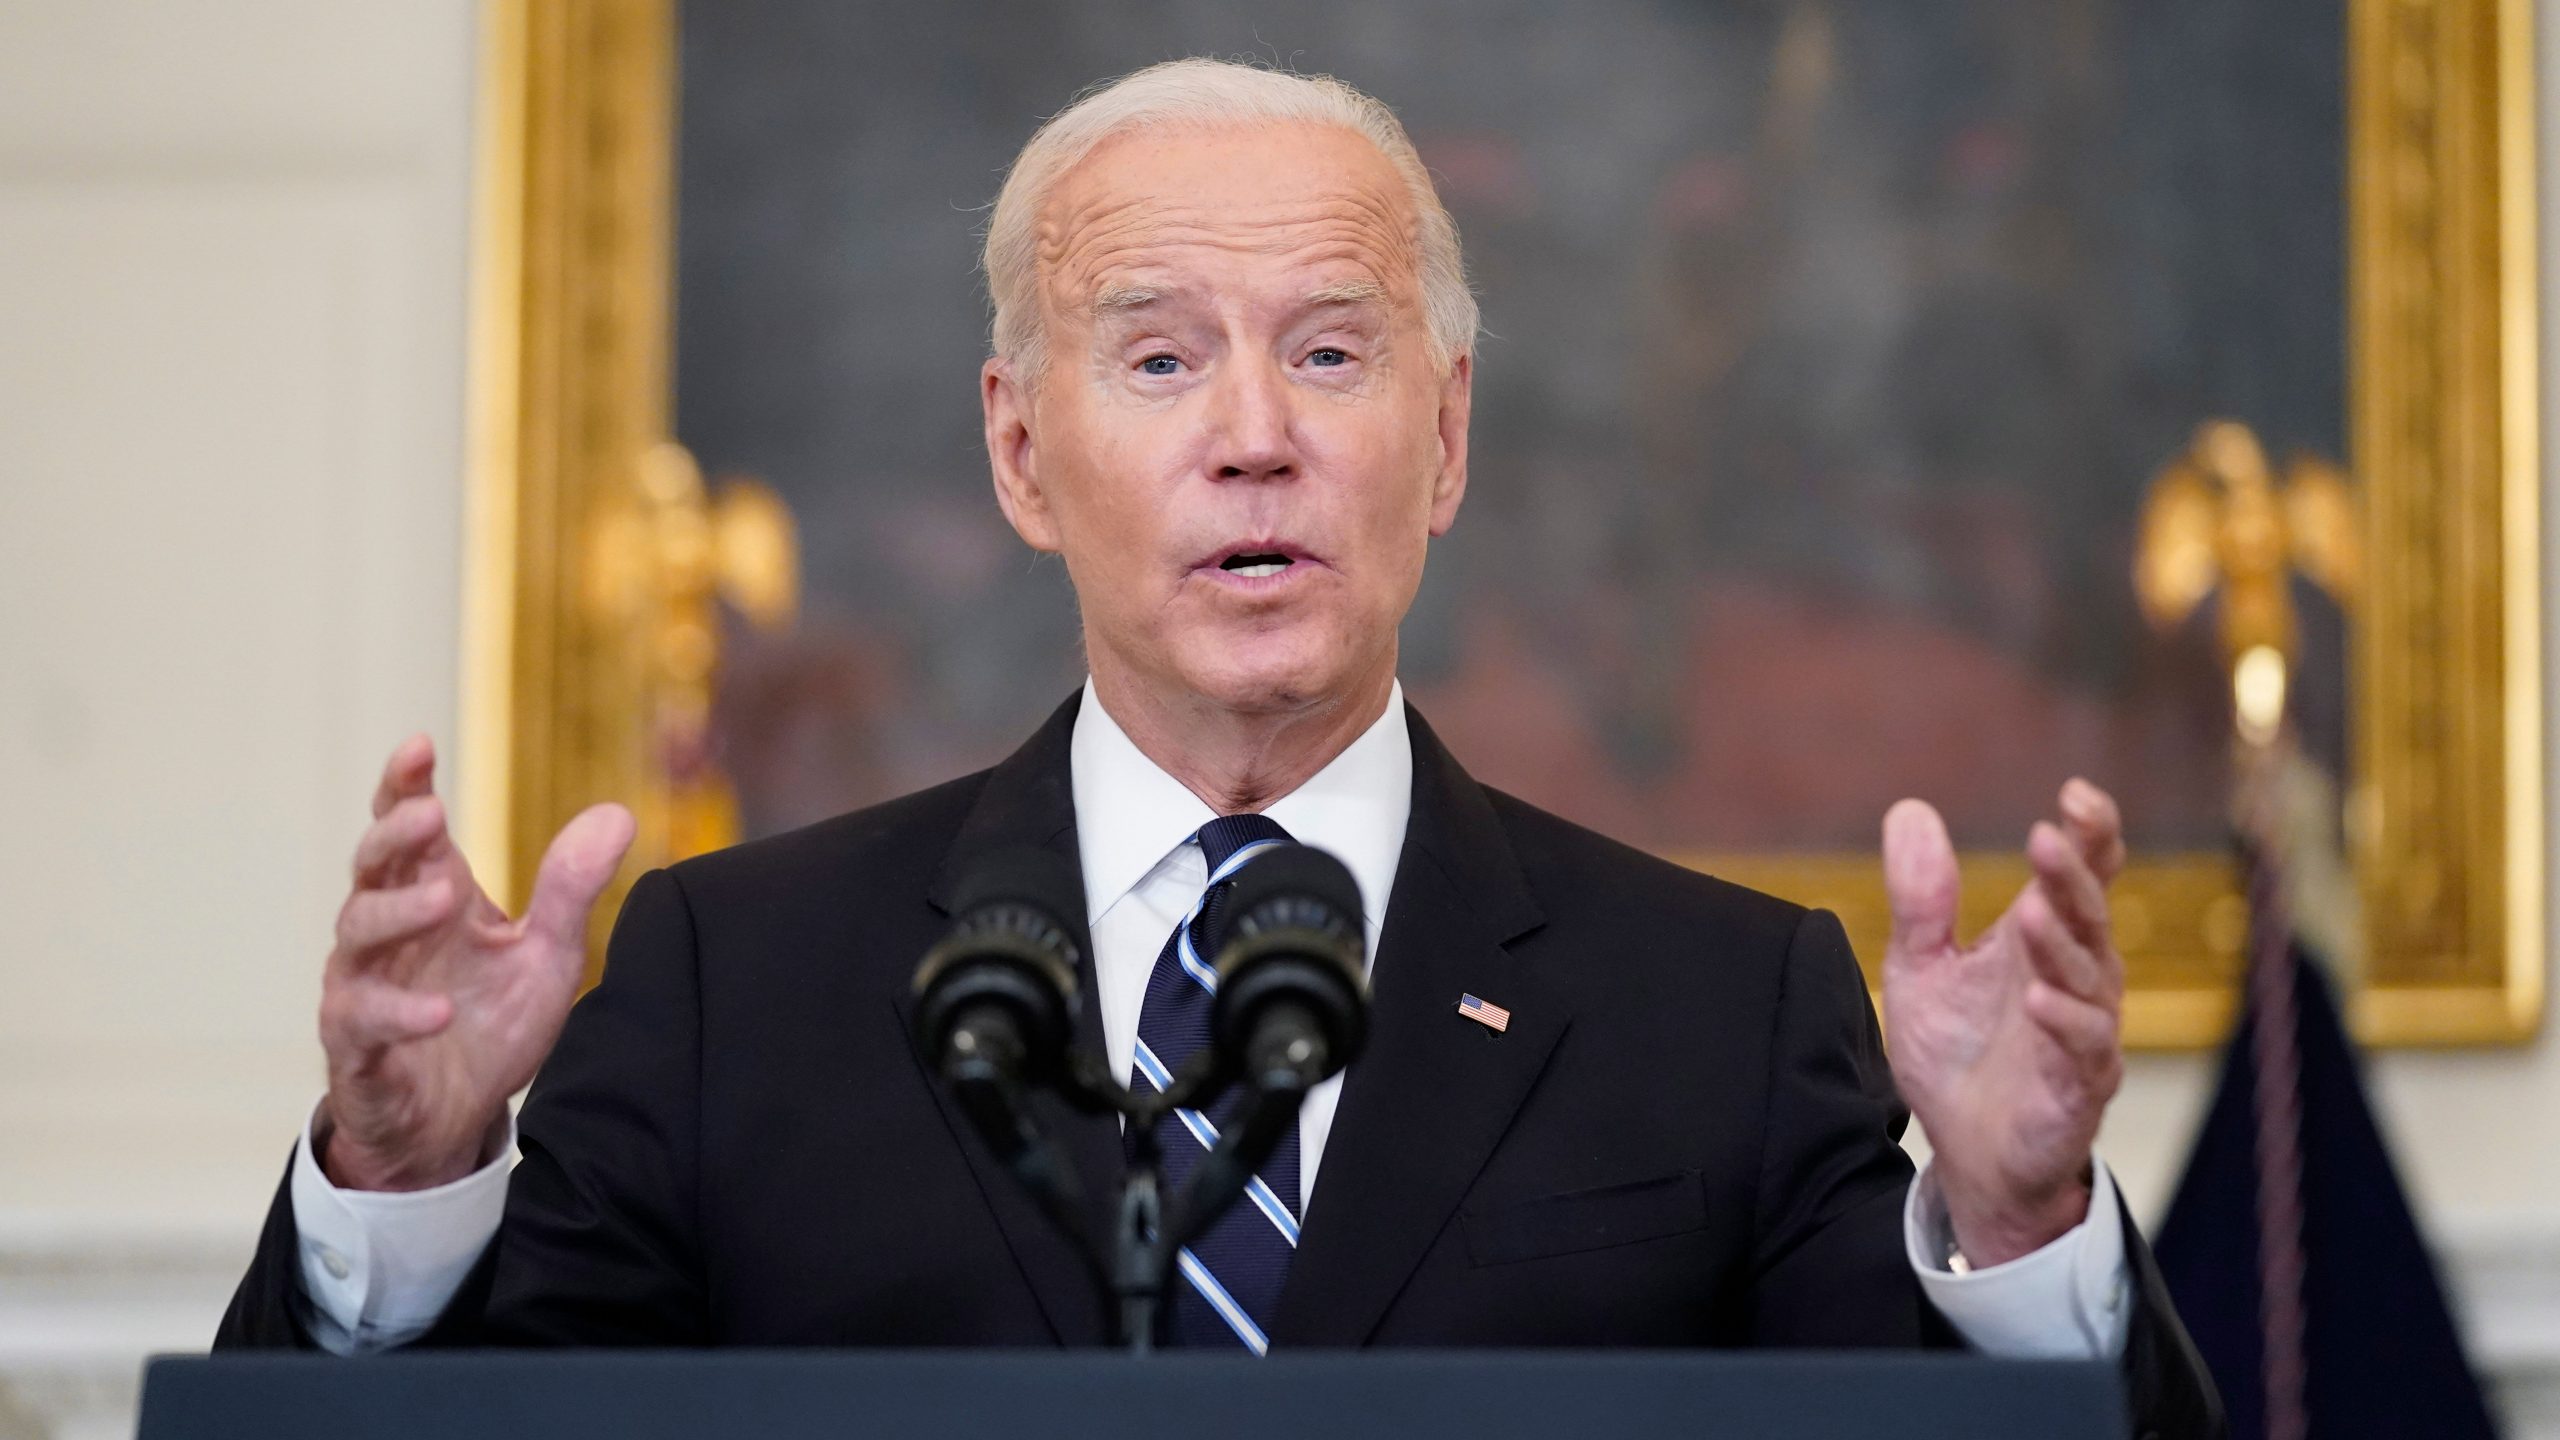 Joe Biden makes ‘candid’ call to China’s Xi Jinping, 1st contact in months